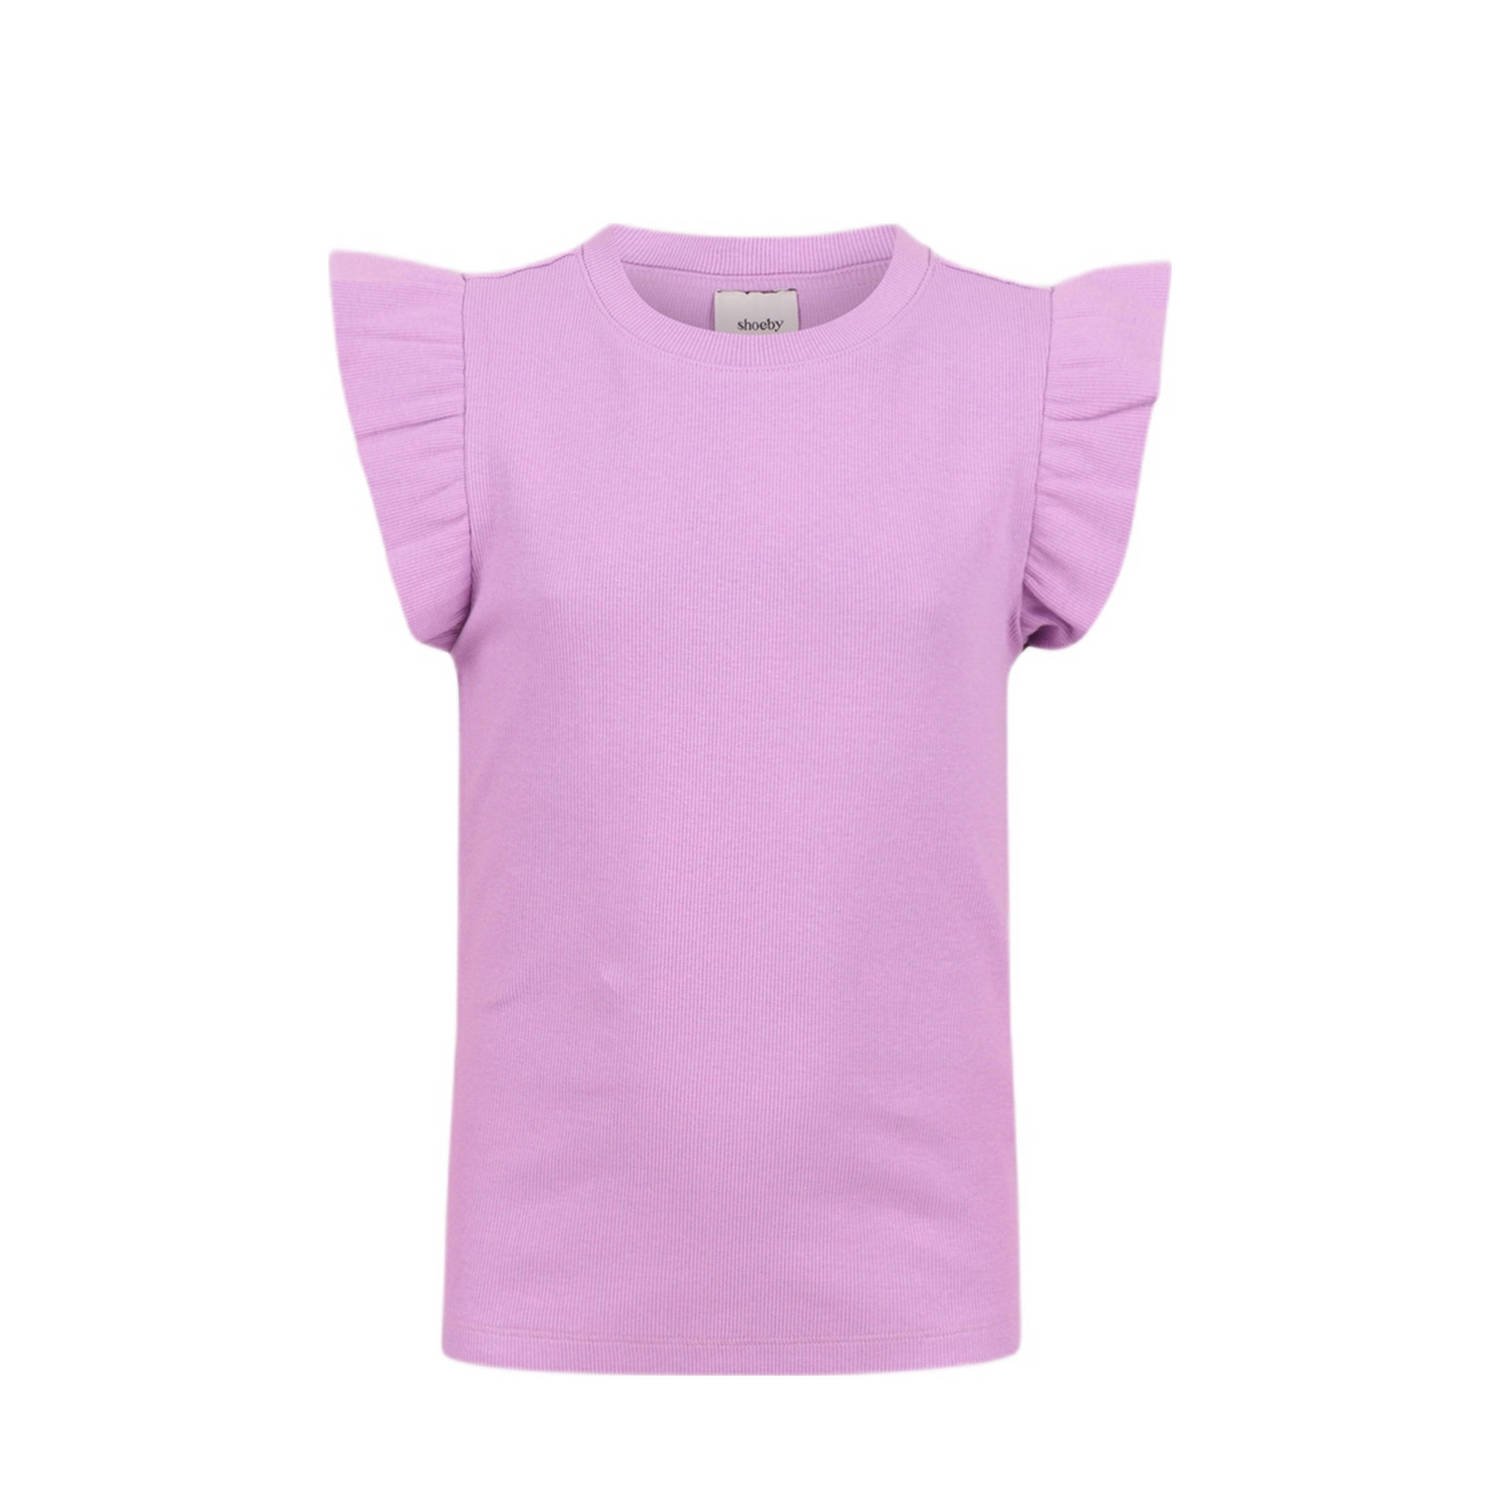 Shoeby T-shirt met ruches paars